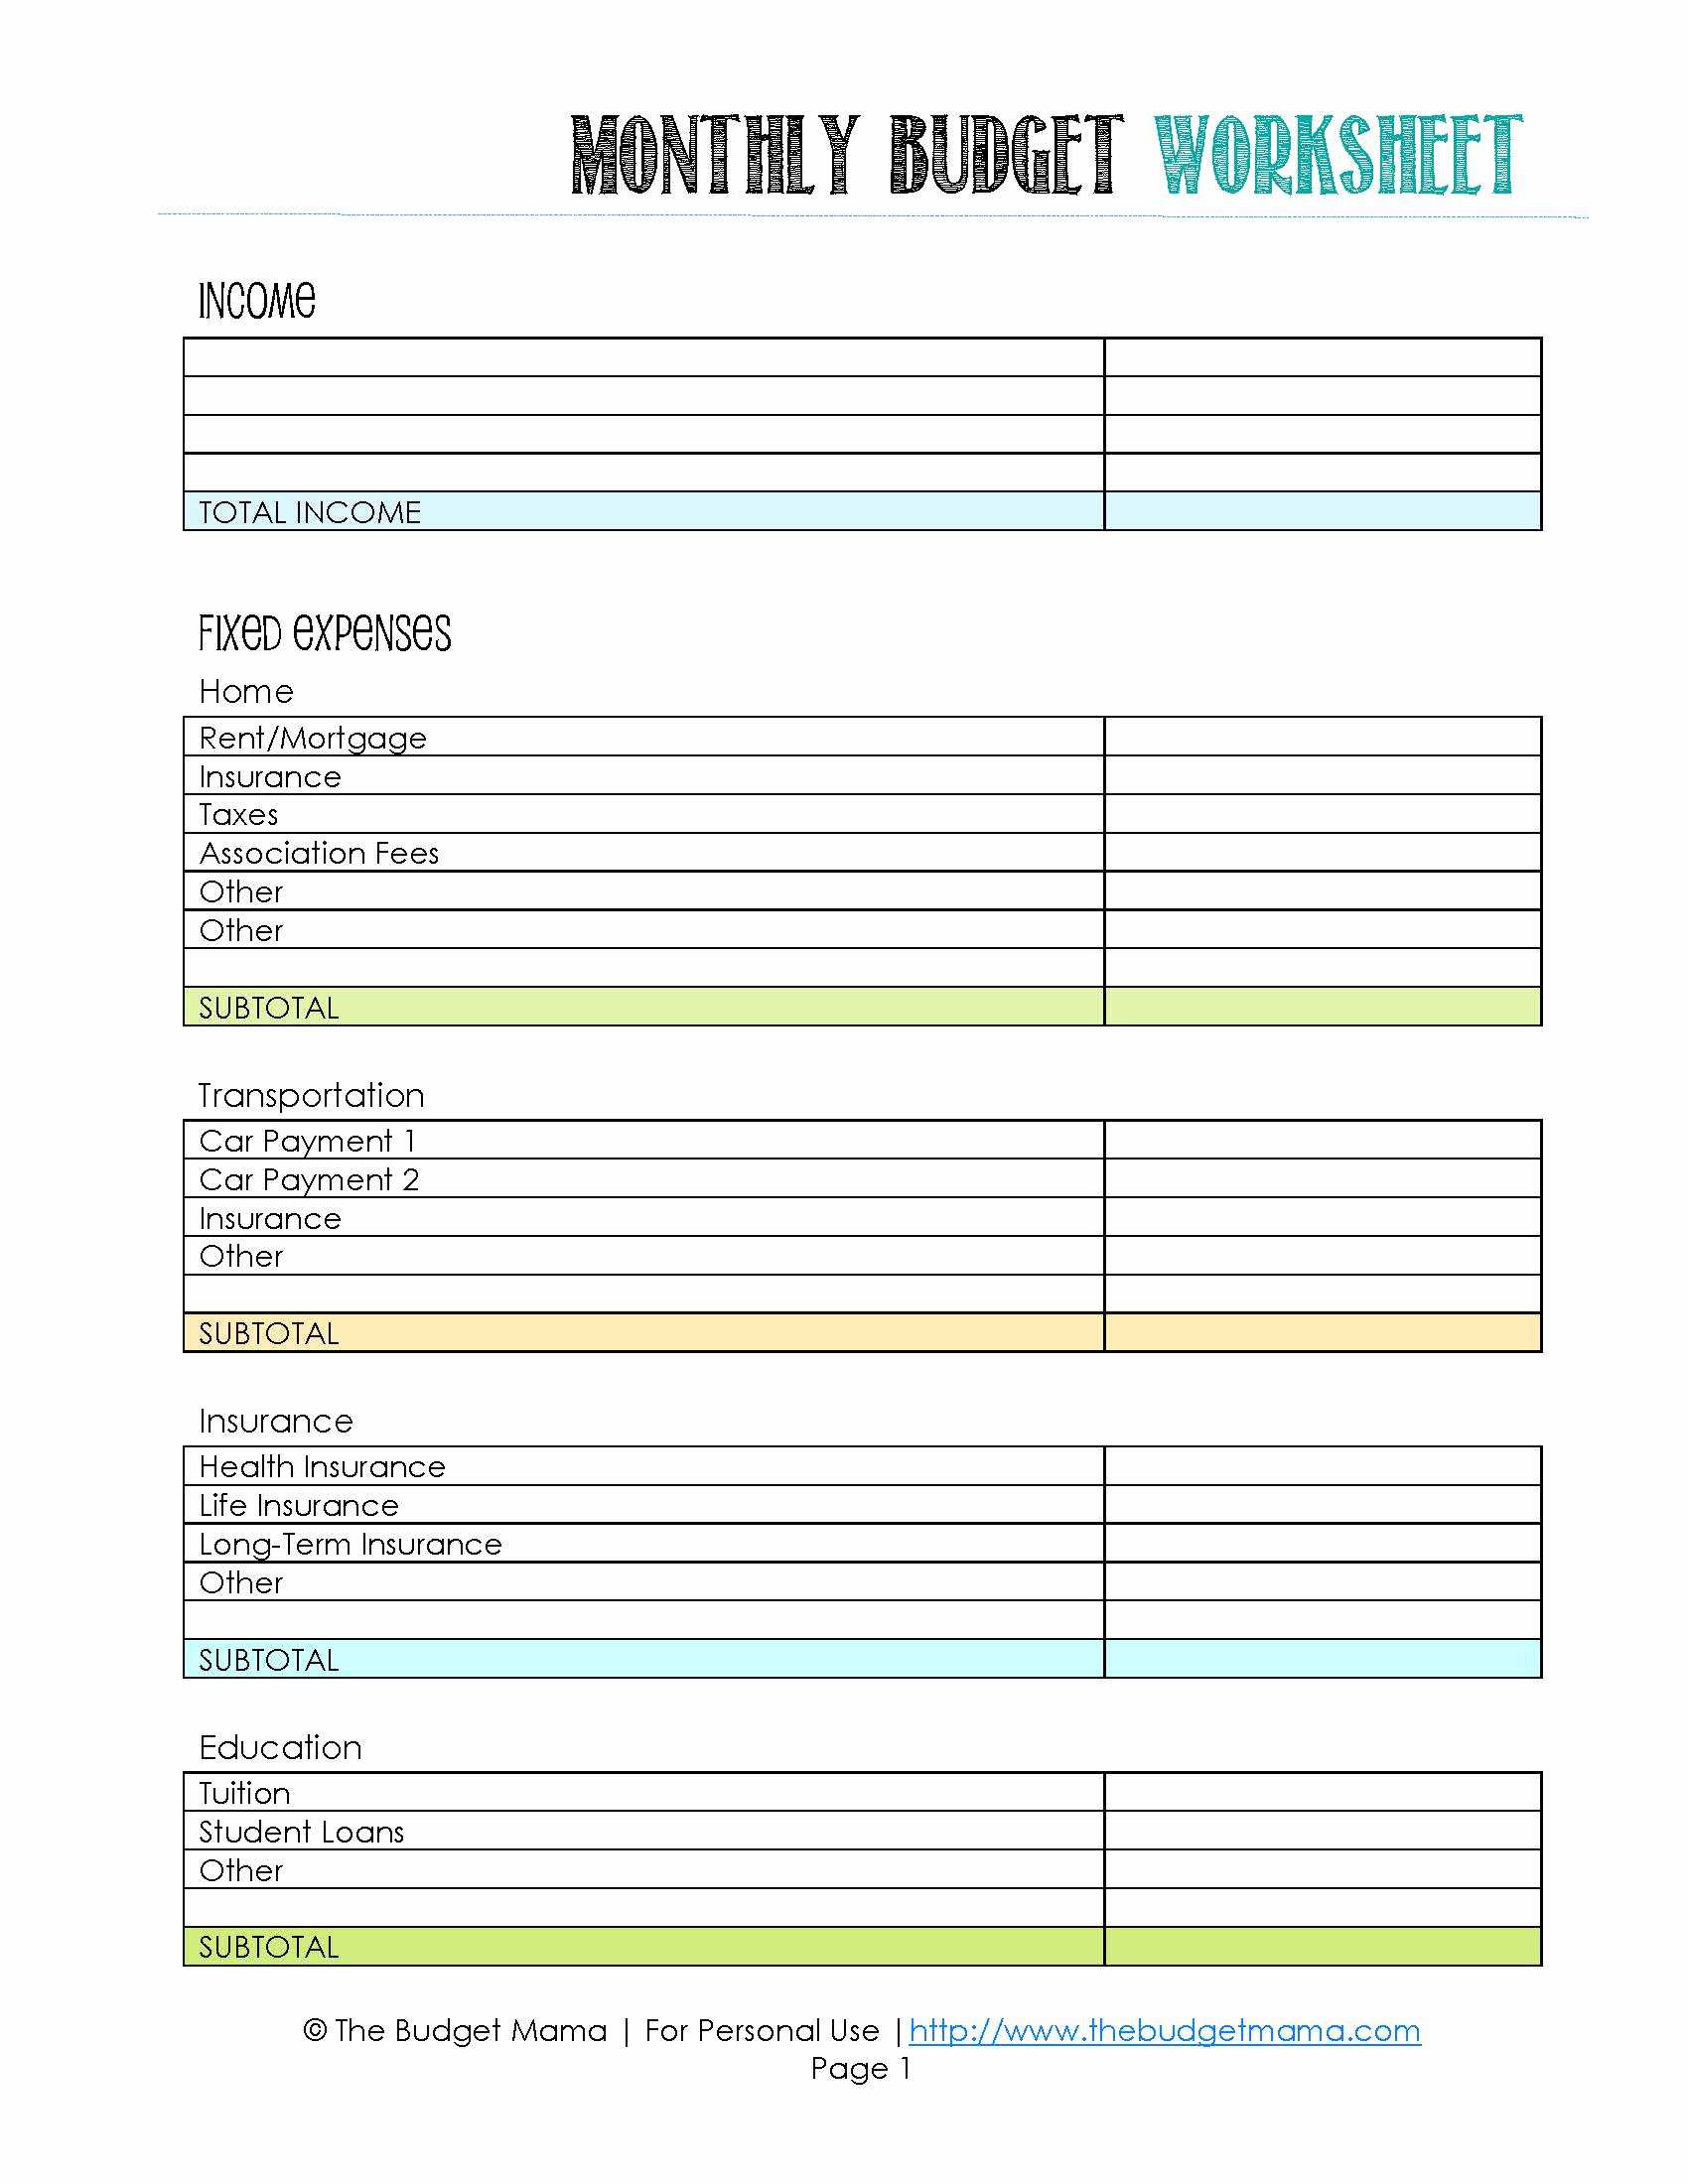 Financial Budget Worksheet Along with Investment Property Spreadsheet for Simple Personal Bud Spreadsheet